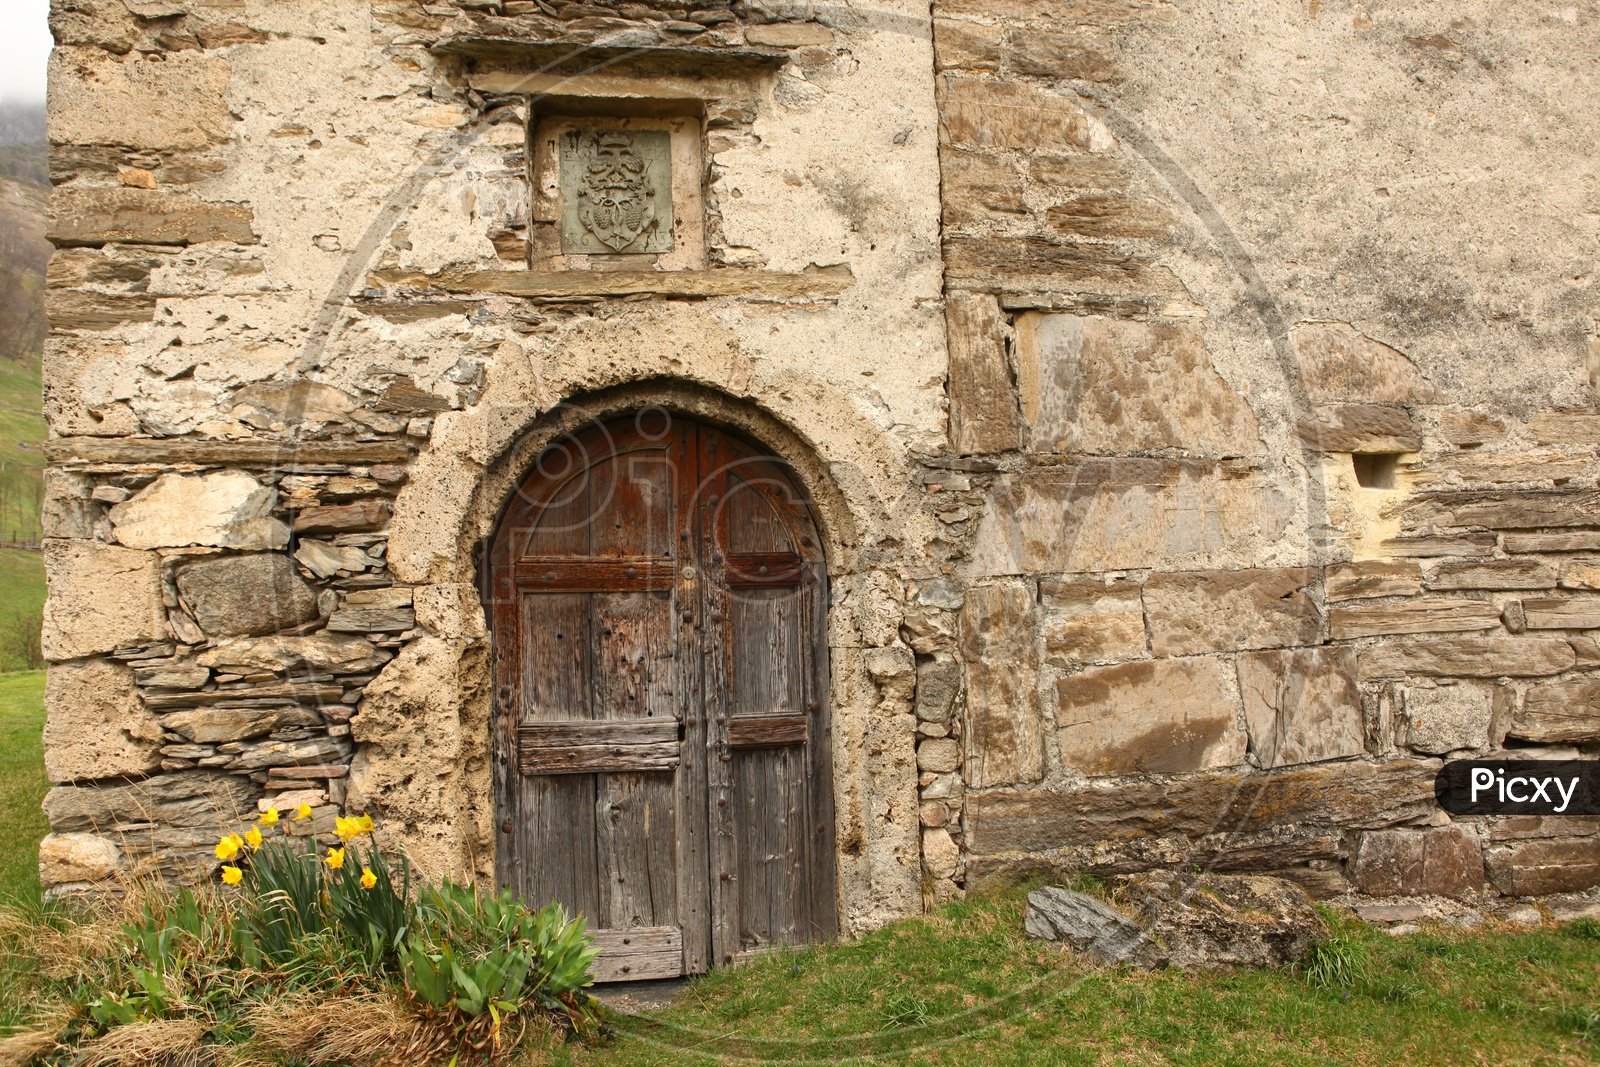 An old door of a house